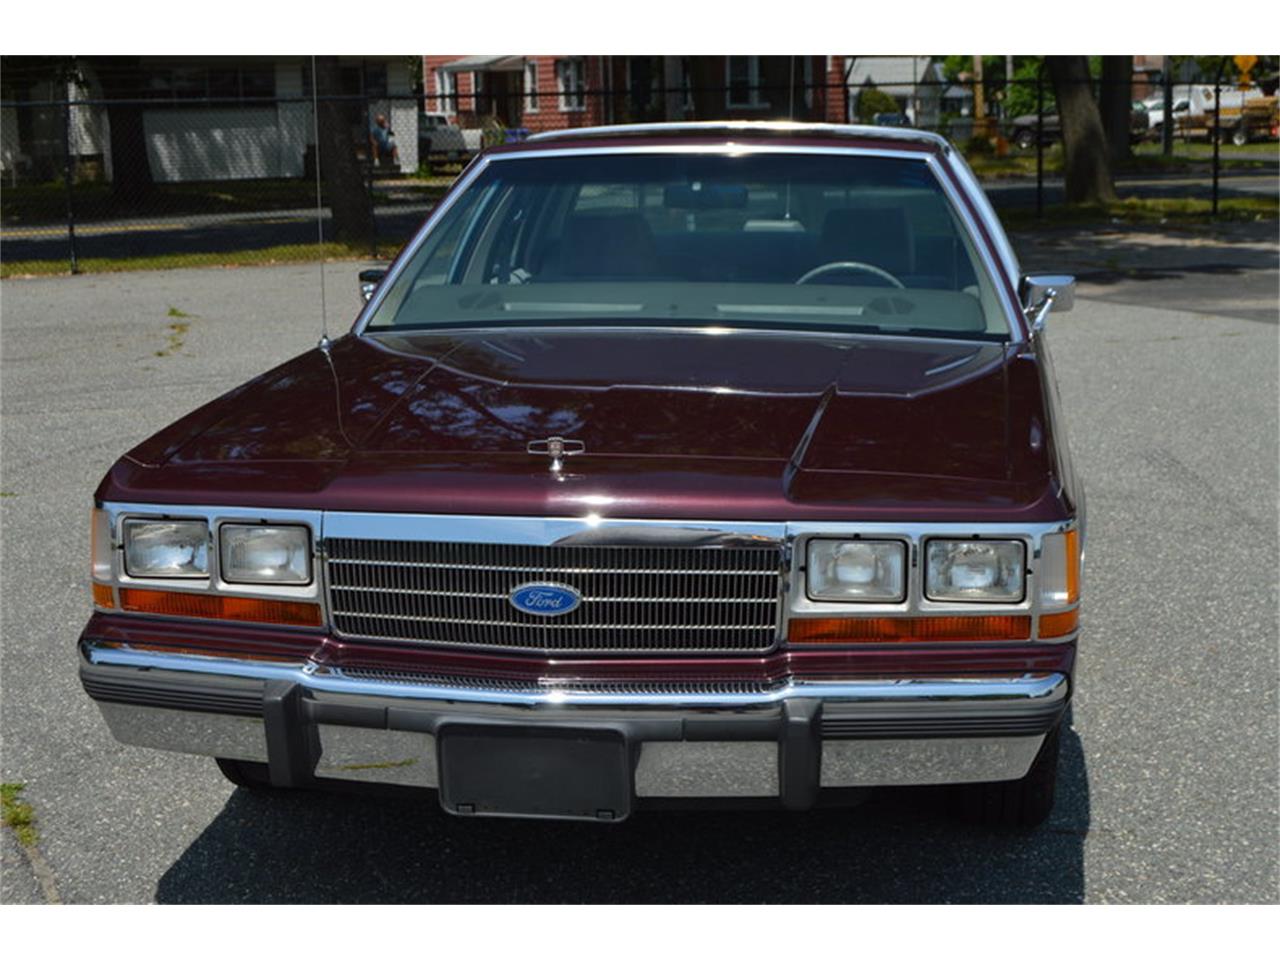 1989 Ford Crown Victoria For Sale Classiccars Com Cc 1128031